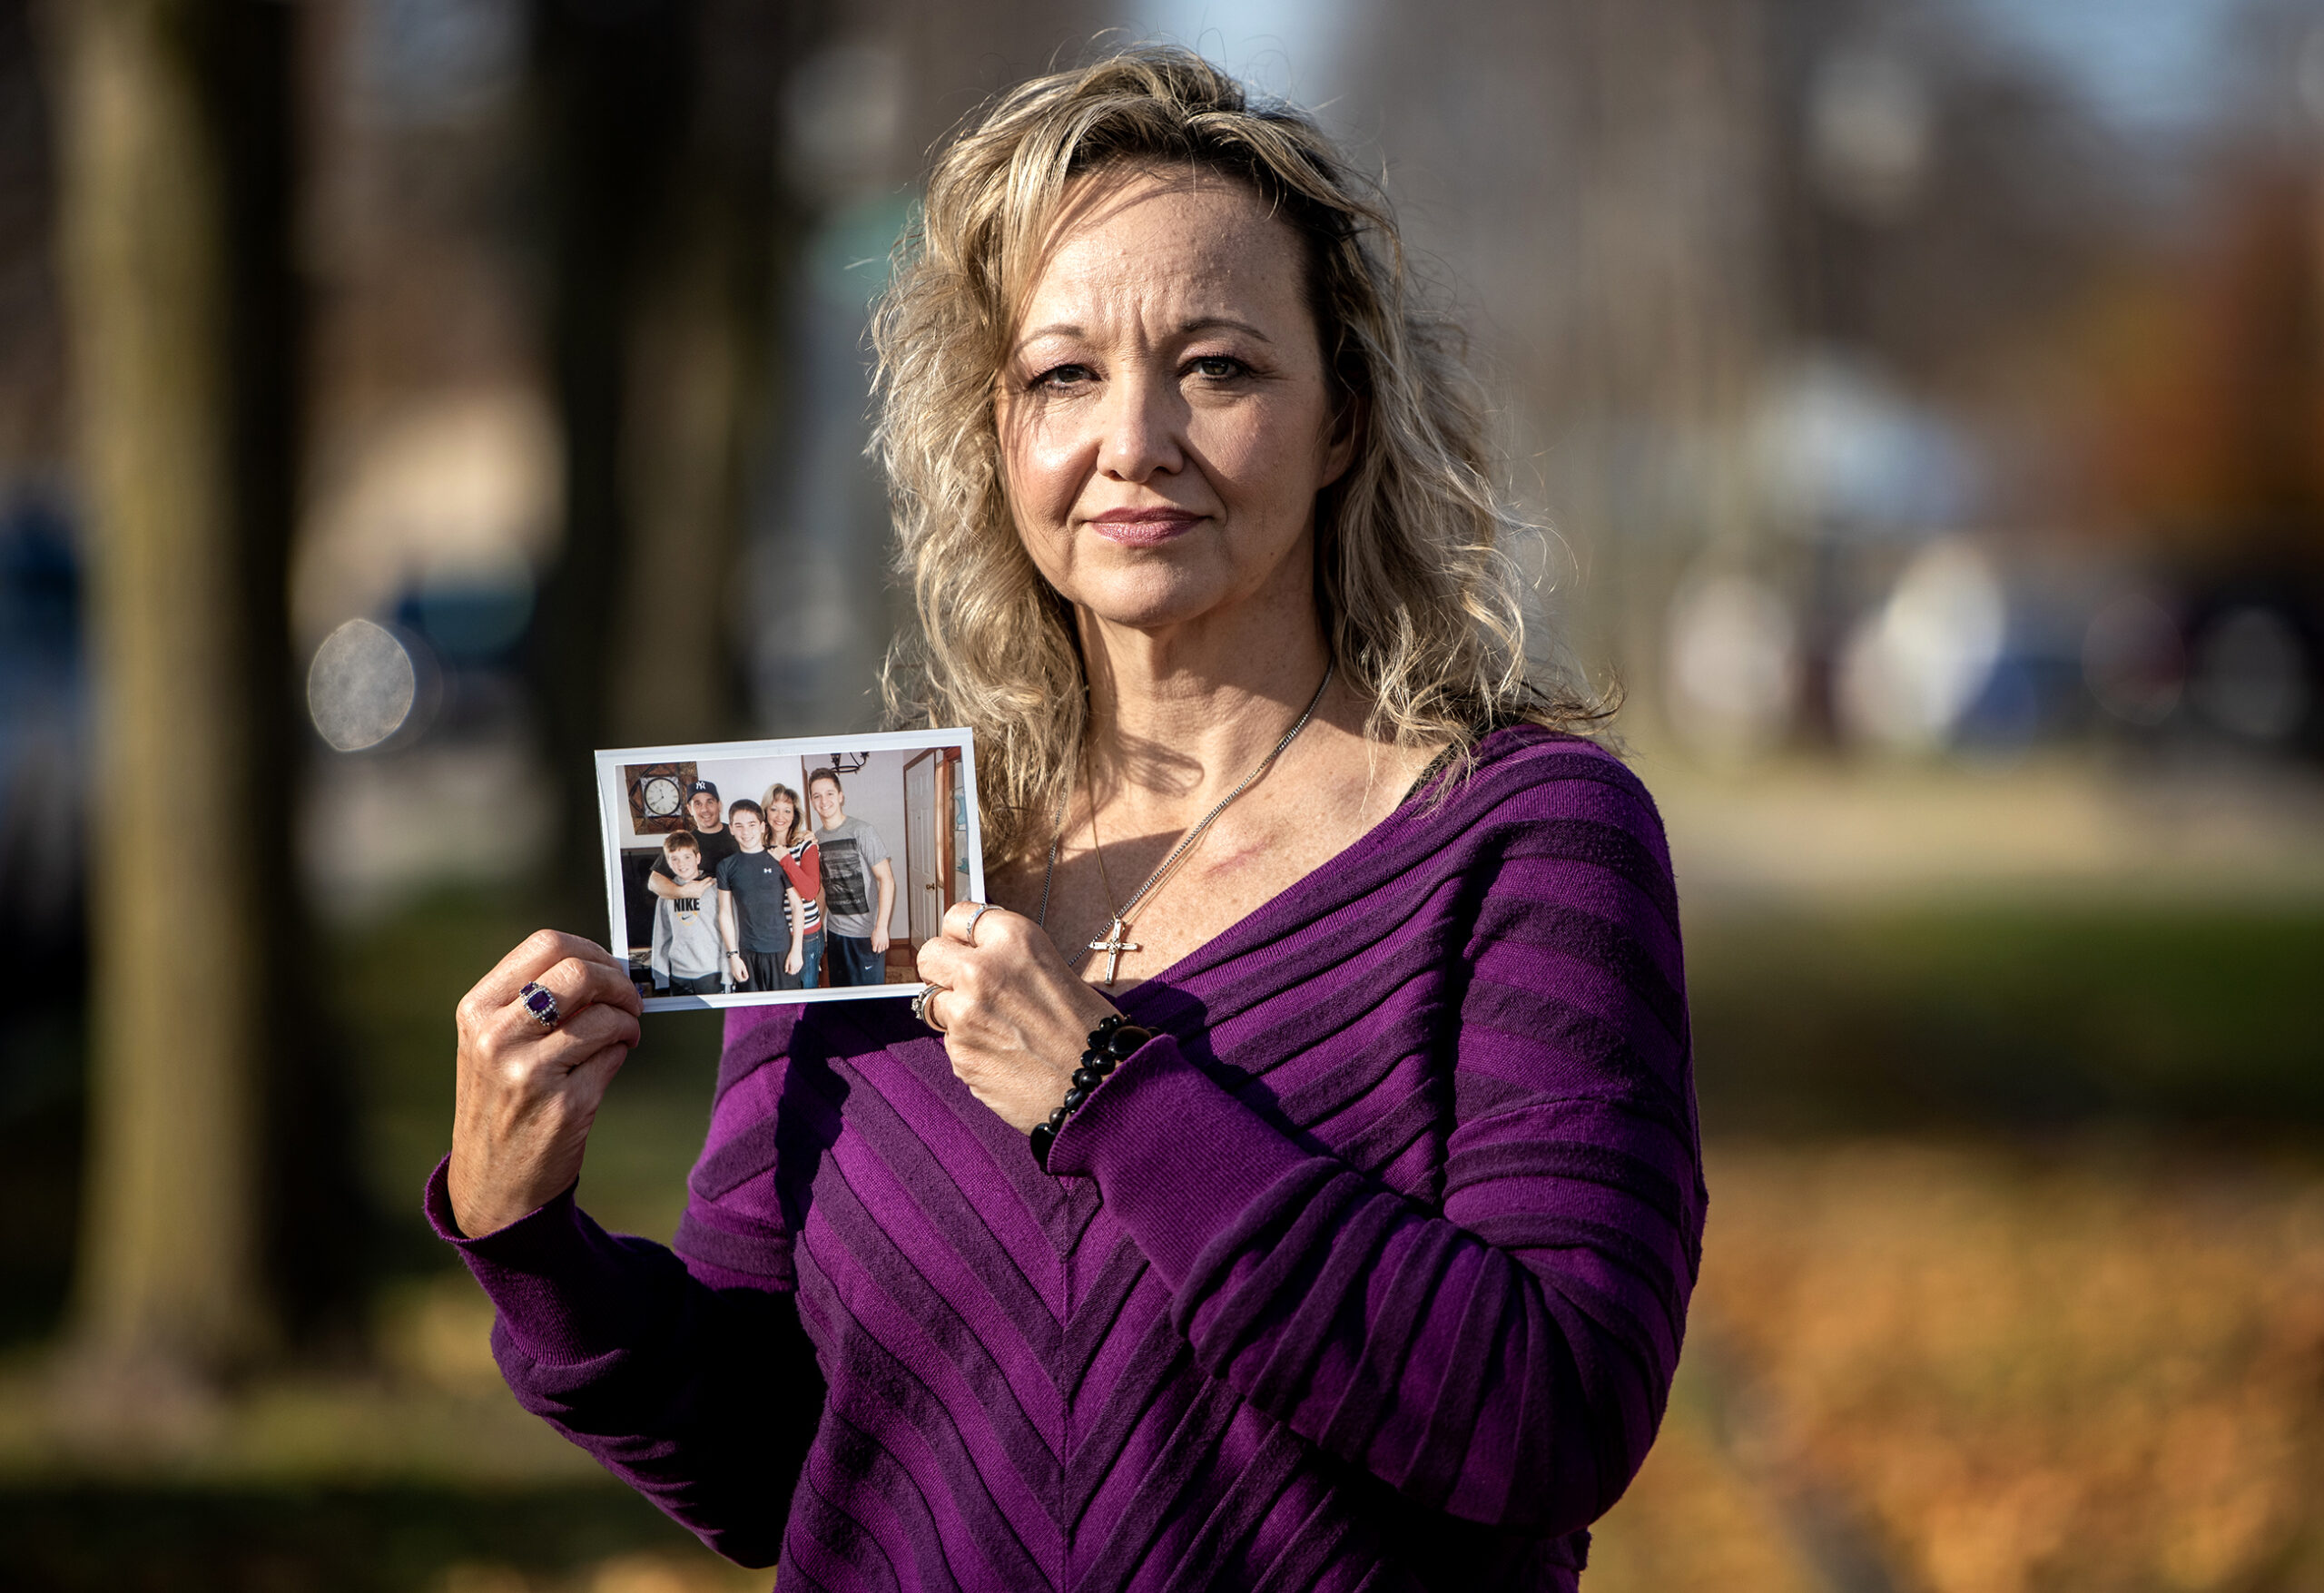 Felicia Labatore stands outside holding a printed photograph.